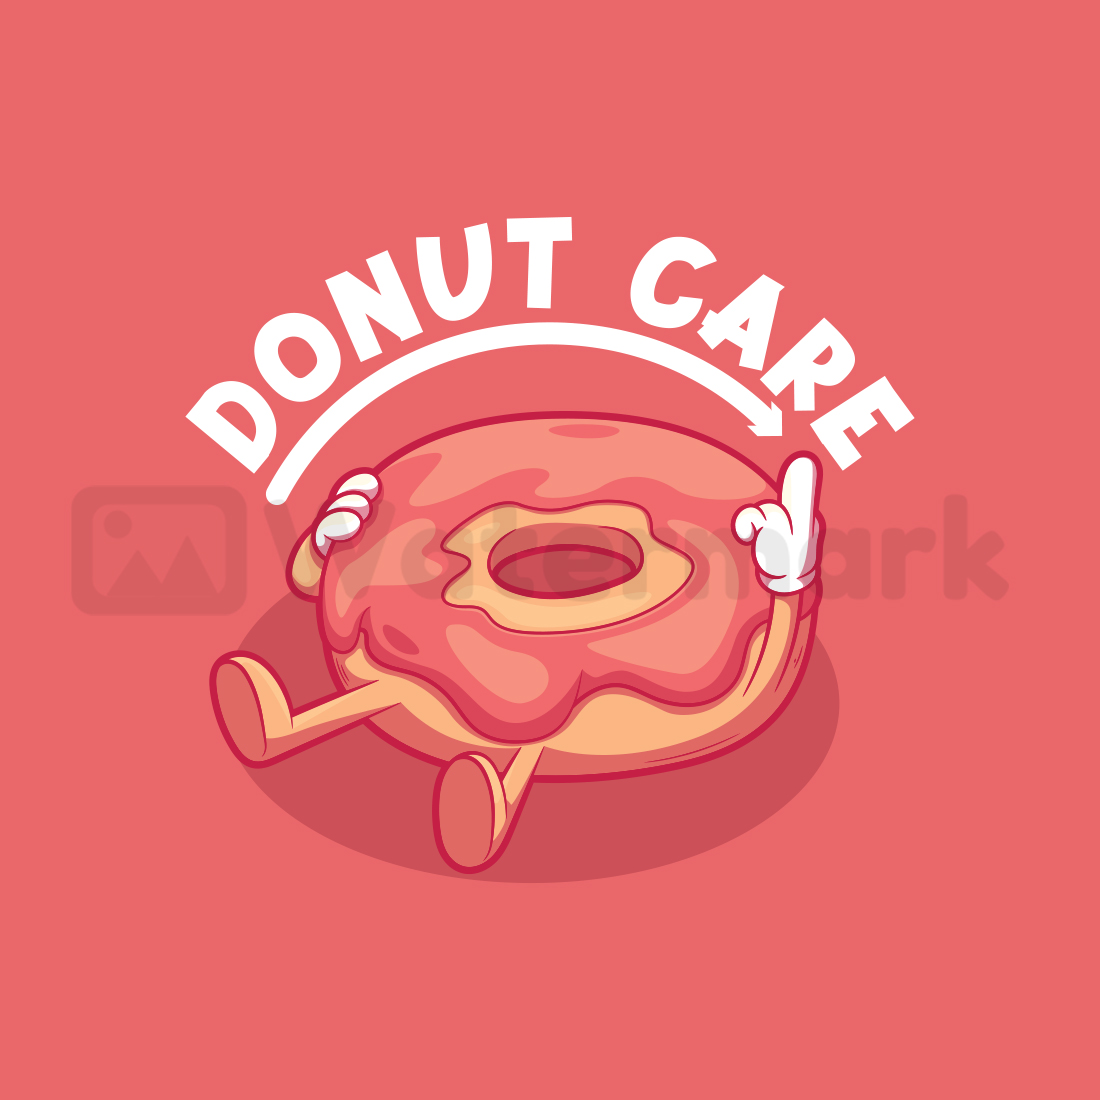 I Donut Care! preview image.